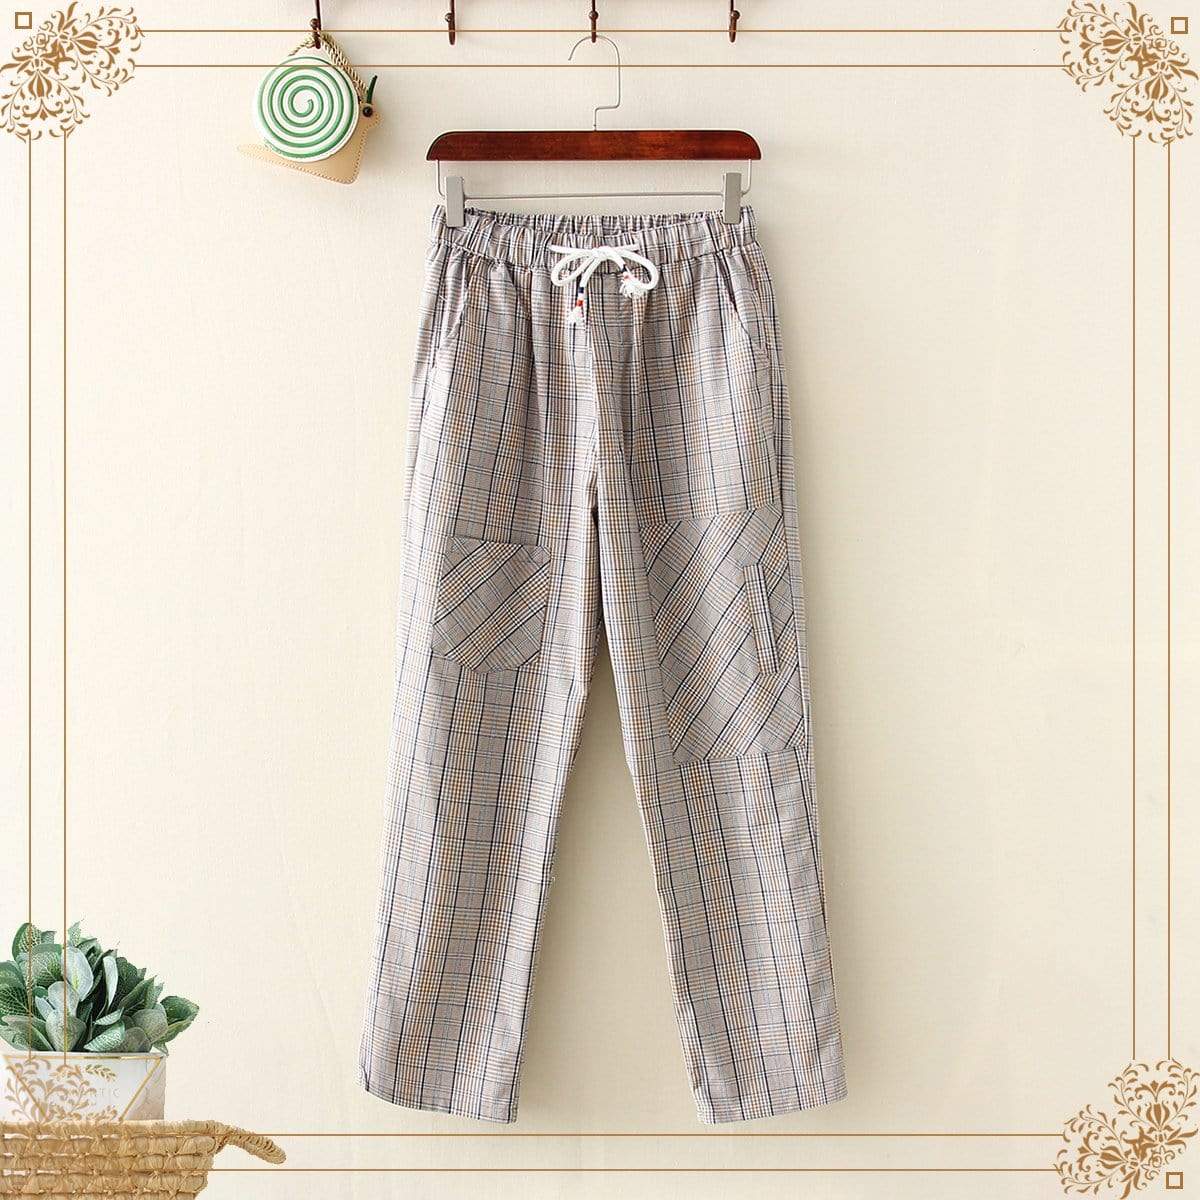 Kawaiifashion Women's Casual Contrast Color Plaid Elastic Straight Pants With Two Pockets